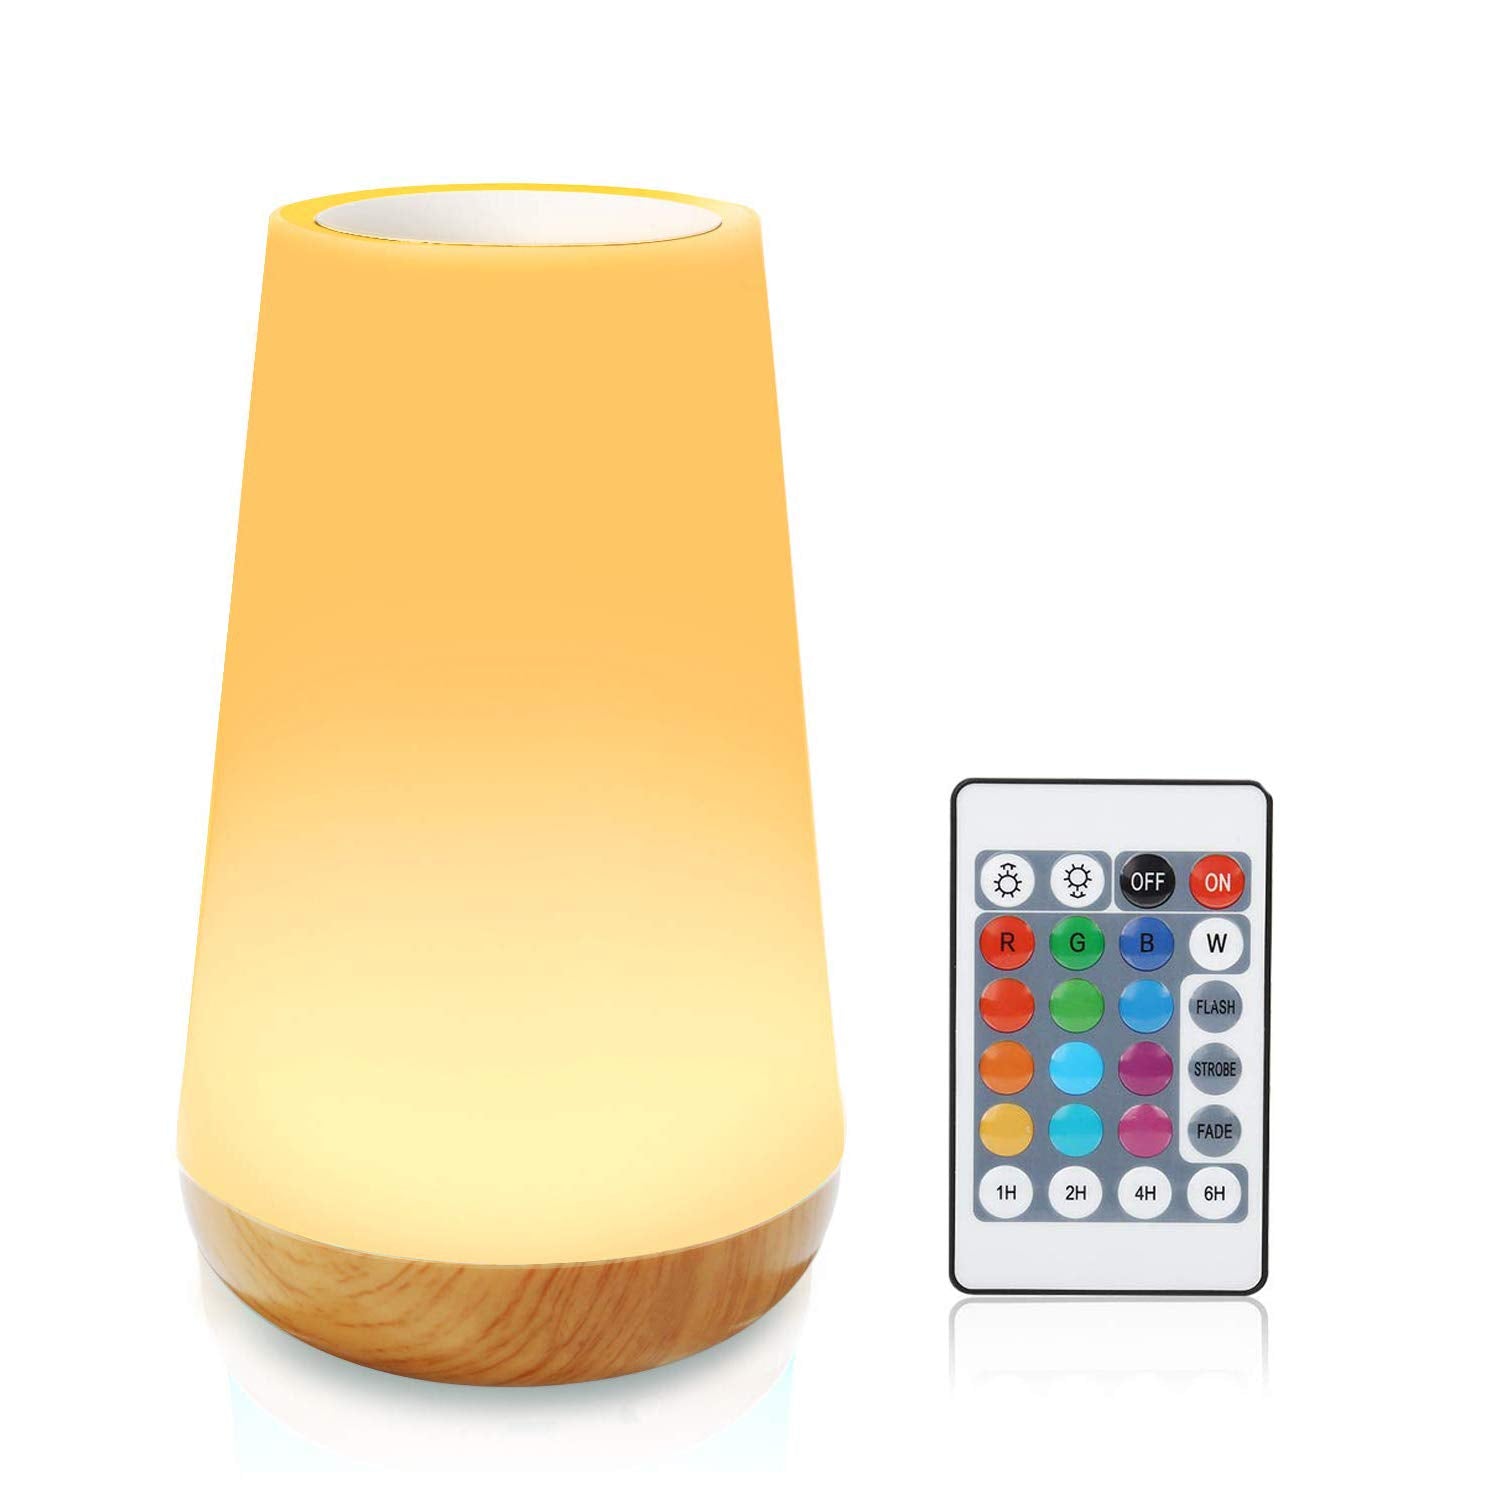 Aisuo Led Night Light, Remote and Touch Control Bedside Lamp with 13 Colors, 1600mAh Rechargeable Lithium Battery, Ideal Nursery Lamp for Kids, Children, Friends